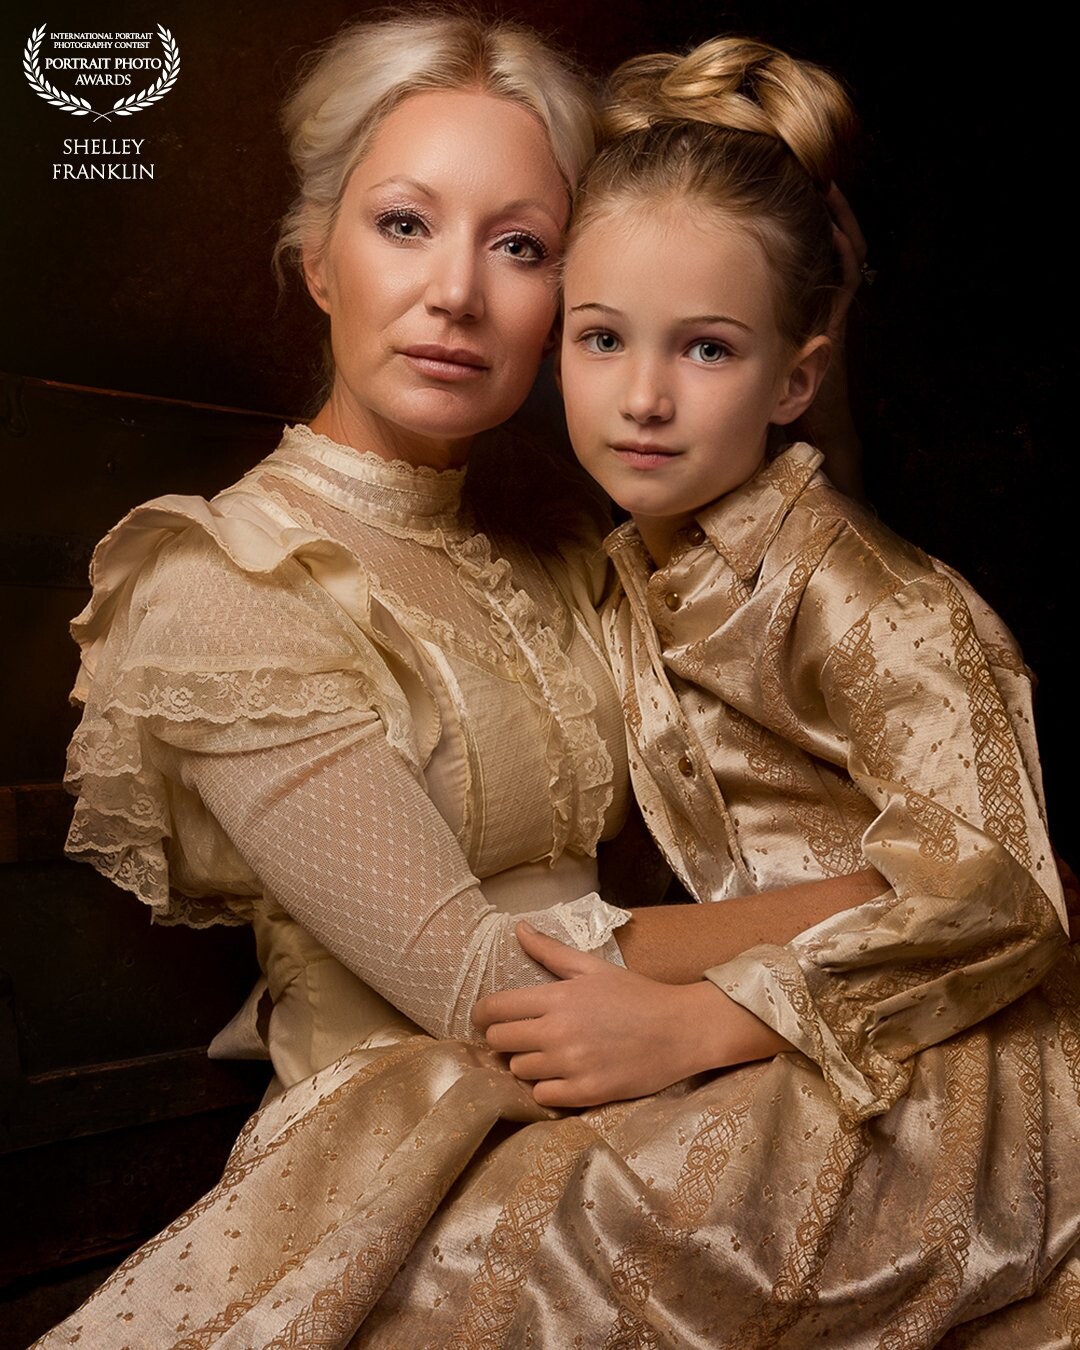 This beautiful Mom and daughter came to the studio for some family photos and when we finished we had some fun choosing some vintage dresses from the studio wardrobe closet and mom did quick updo's on both of them.  They ended up being my favorite photos we took that day.